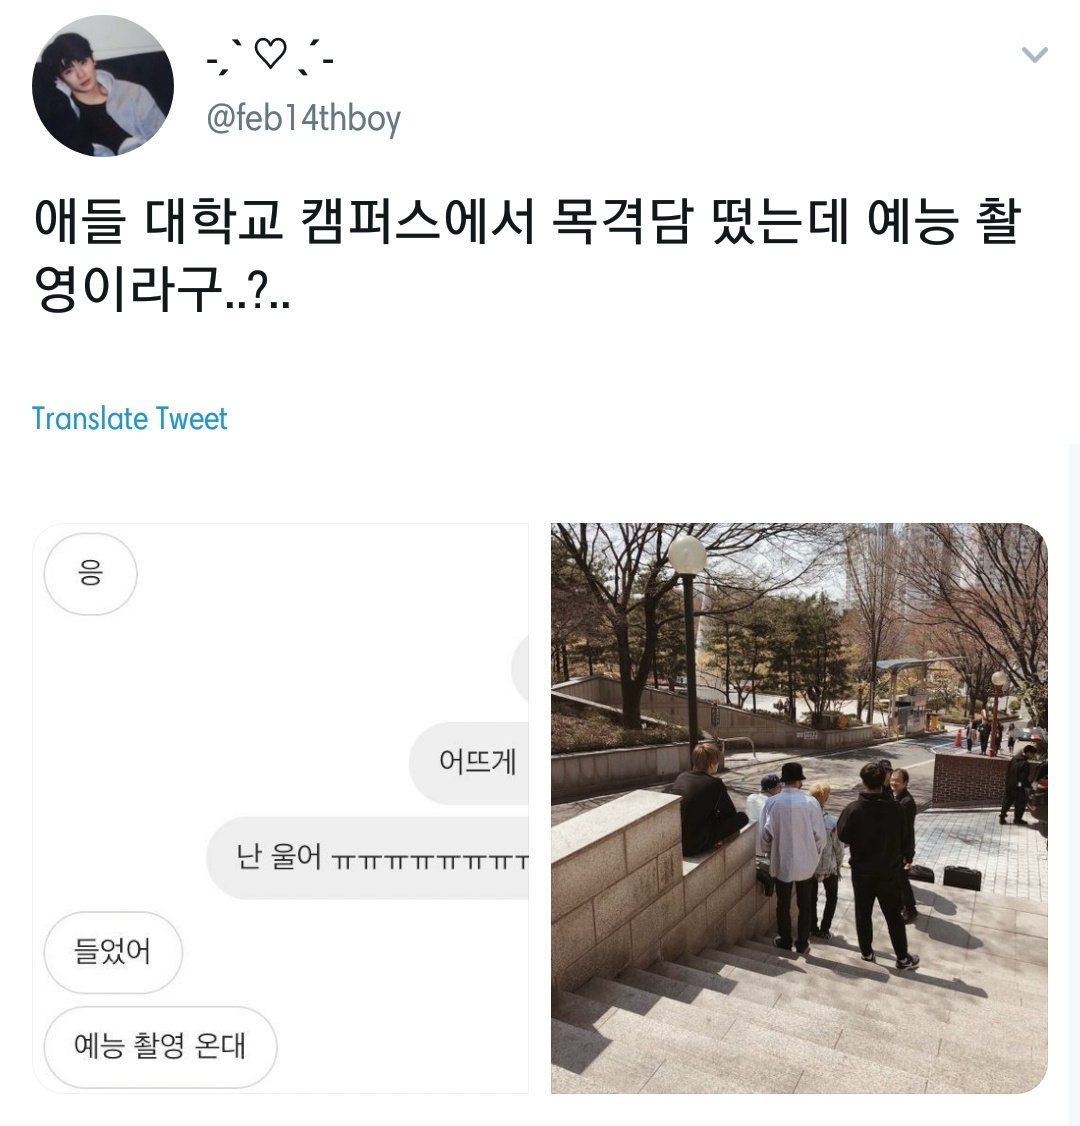 today on 190404, op spoyted the boy at @ Sogang University, seems are they filiming for a program..? in these picture perhaps there's yuta, mark, jaehyun, taeyong and taeil from what ive seen his bucket hat! 